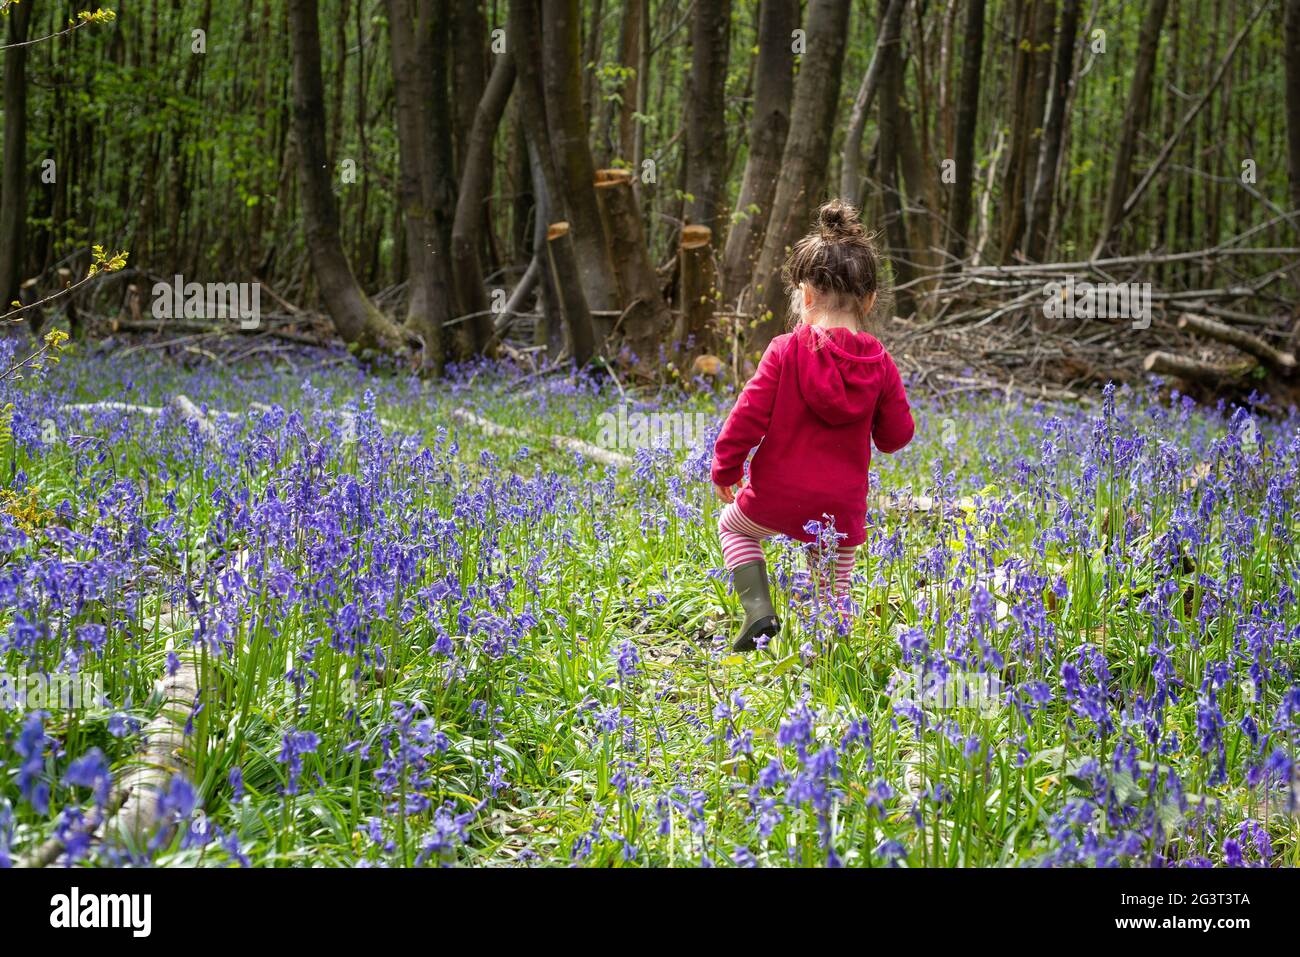 Young toddler walks through a lush bluebell woodland during springtime Stock Photo